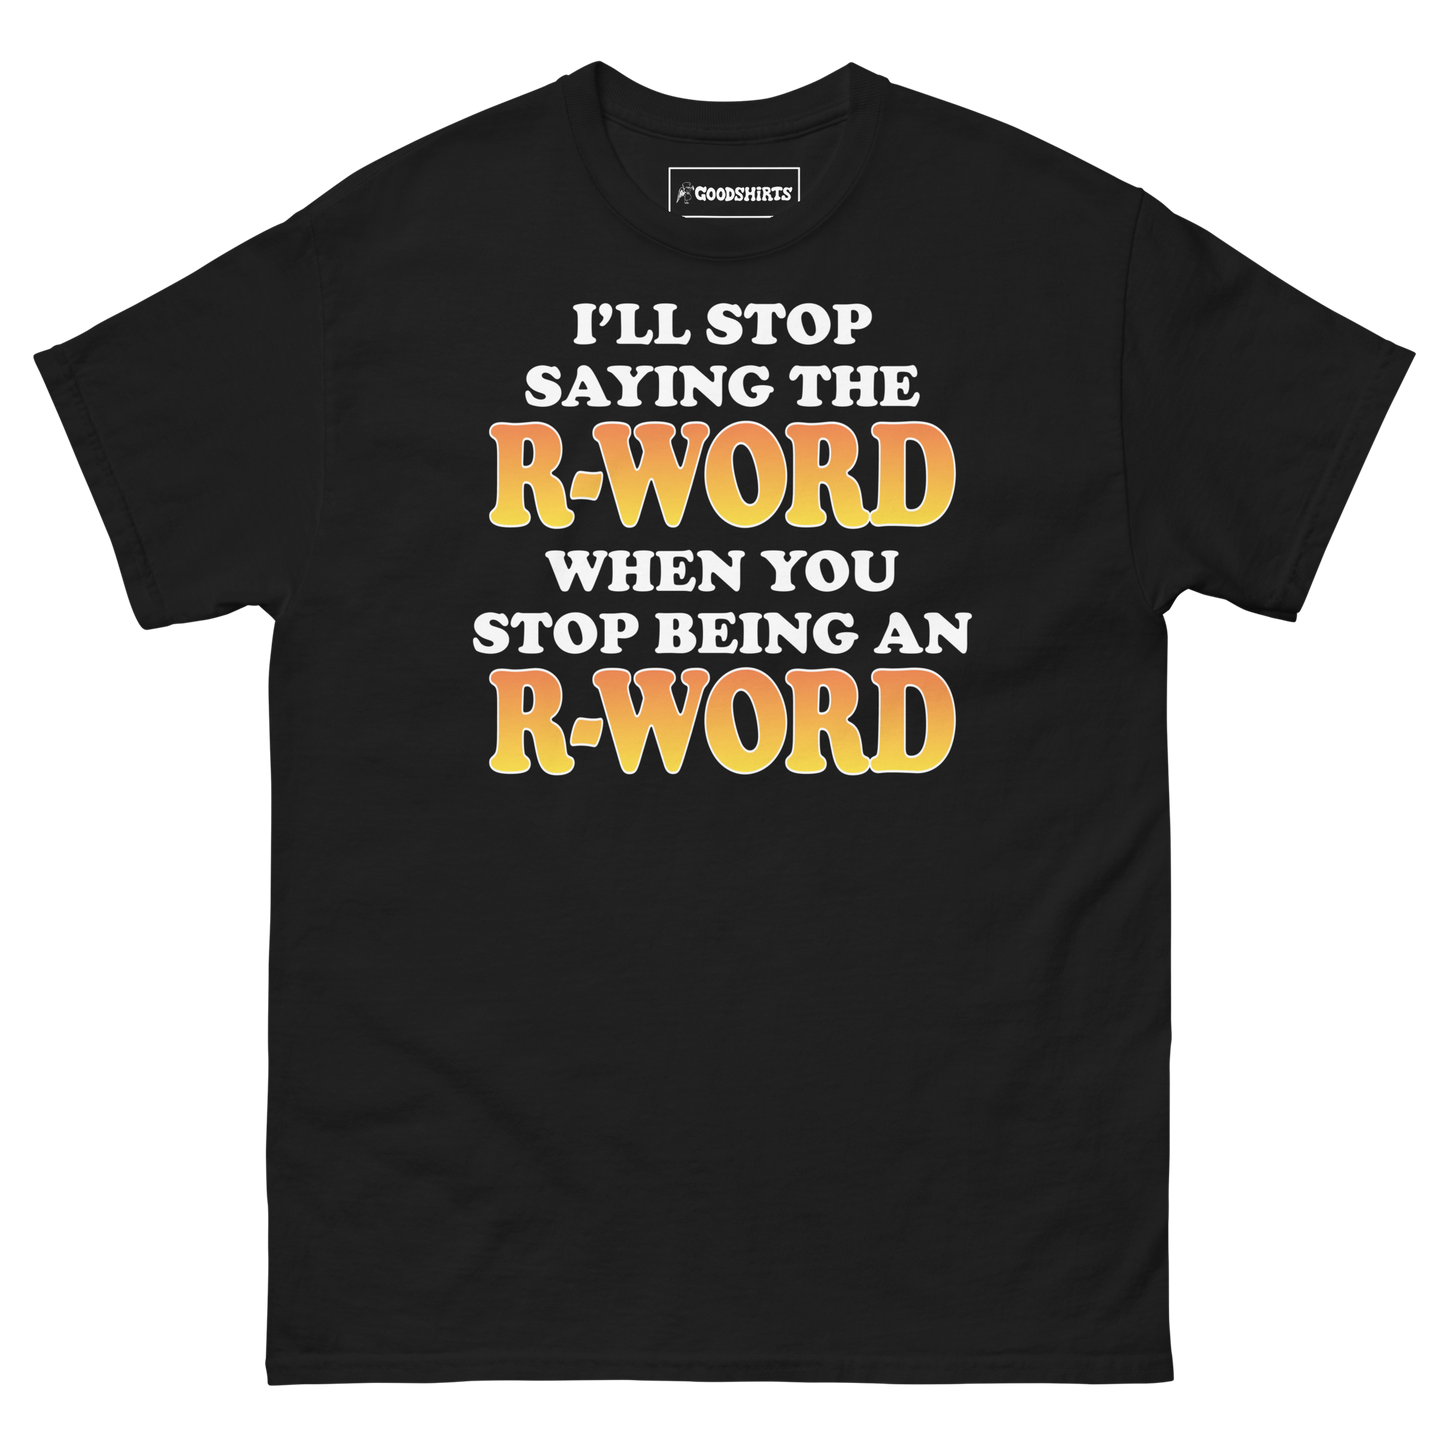 I'll Stop Saying The R-Word When You Stop Being An R-Word.